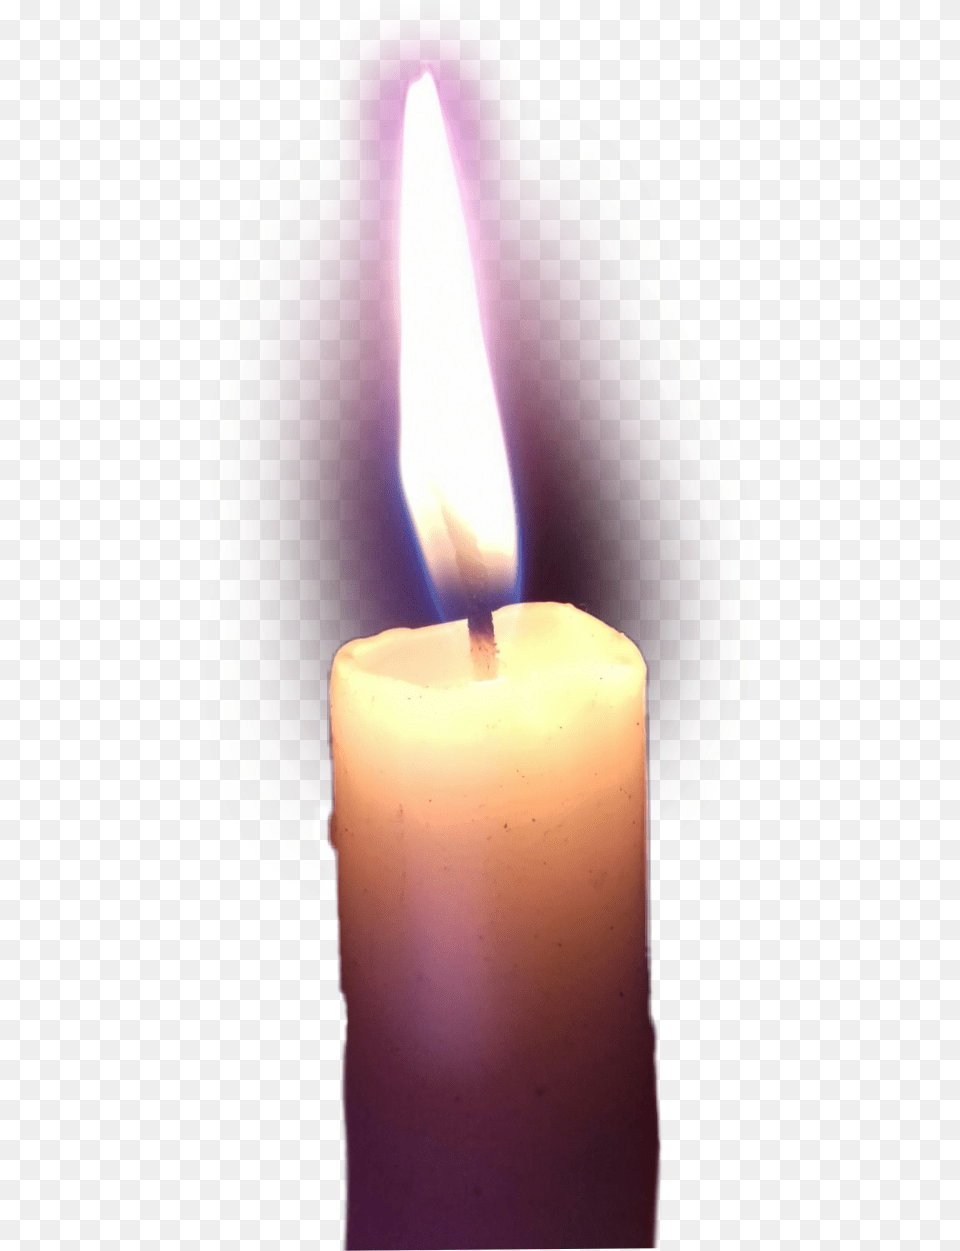 Candle Flame Lit Dark Light Made From The Artist Of Lit Candle Transparent, Fire Free Png